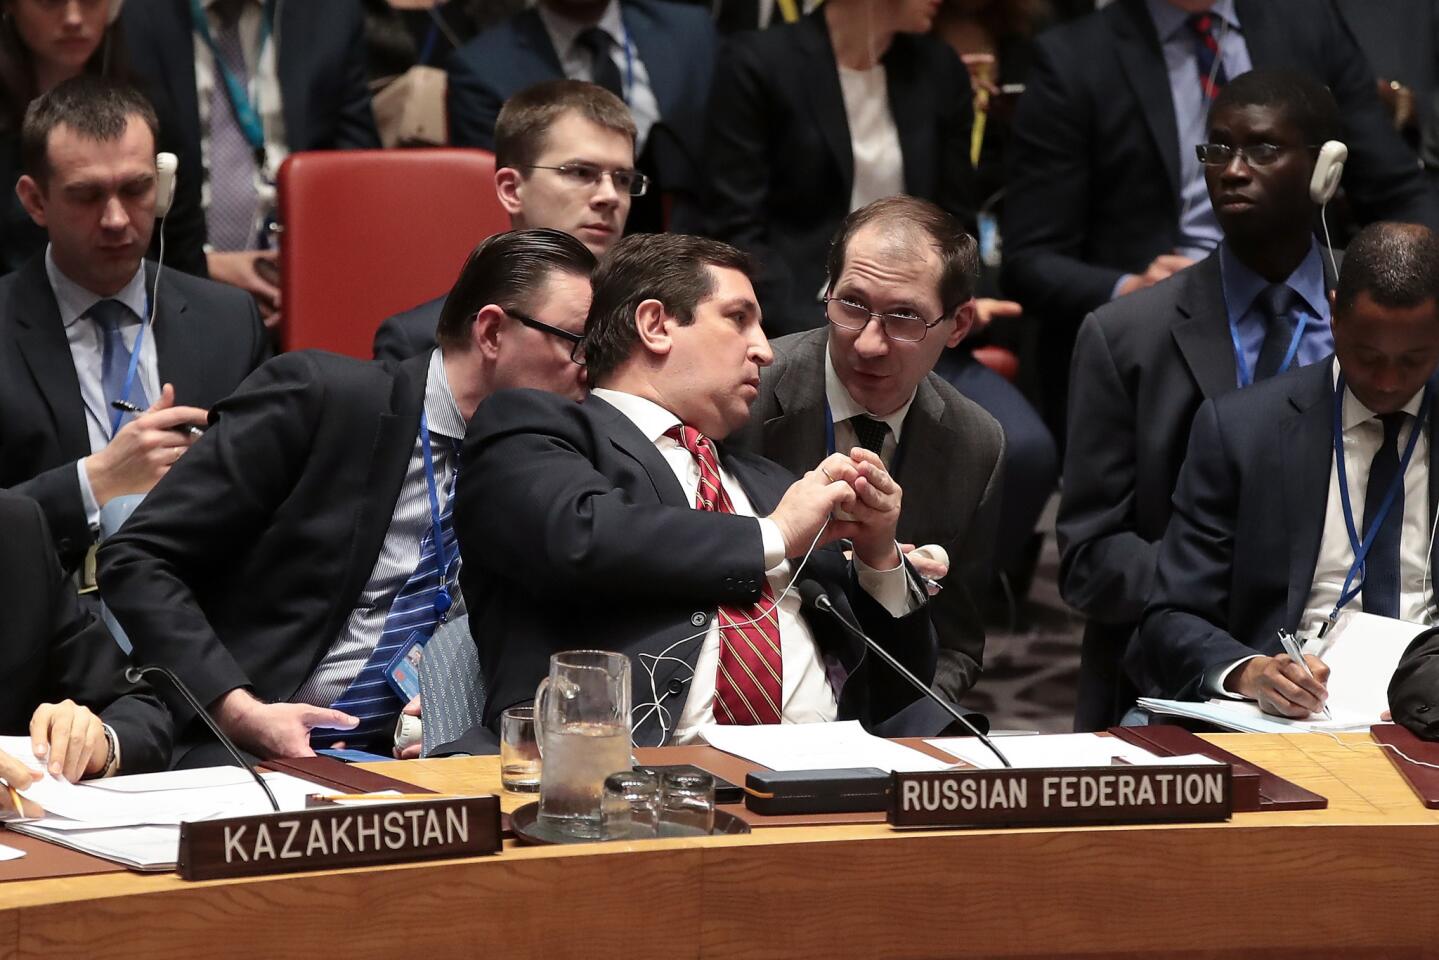 Russian Deputy Permanent Representative to the United Nations Vladimir Safronkov confers with aides during a meeting of the United Nations Security Council concerning the situation in Syria, at U.N. headquarters on April 7 in New York City.